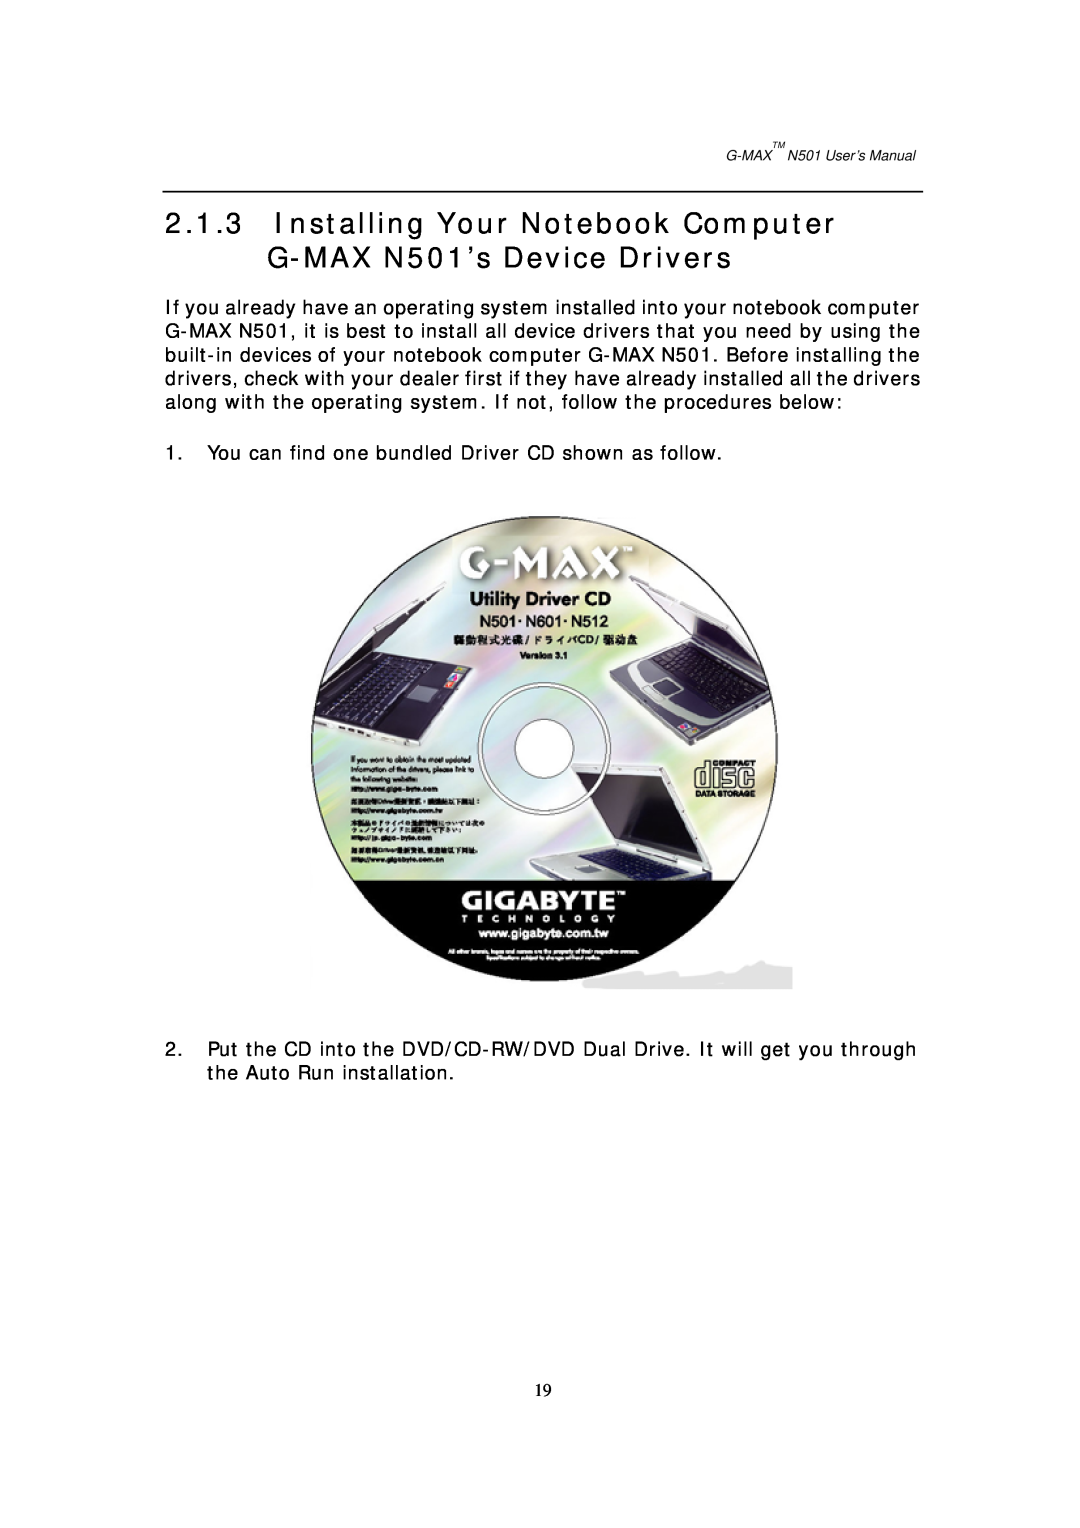 Gigabyte user manual Installing Your Notebook Computer G-MAX N501’s Device Drivers 